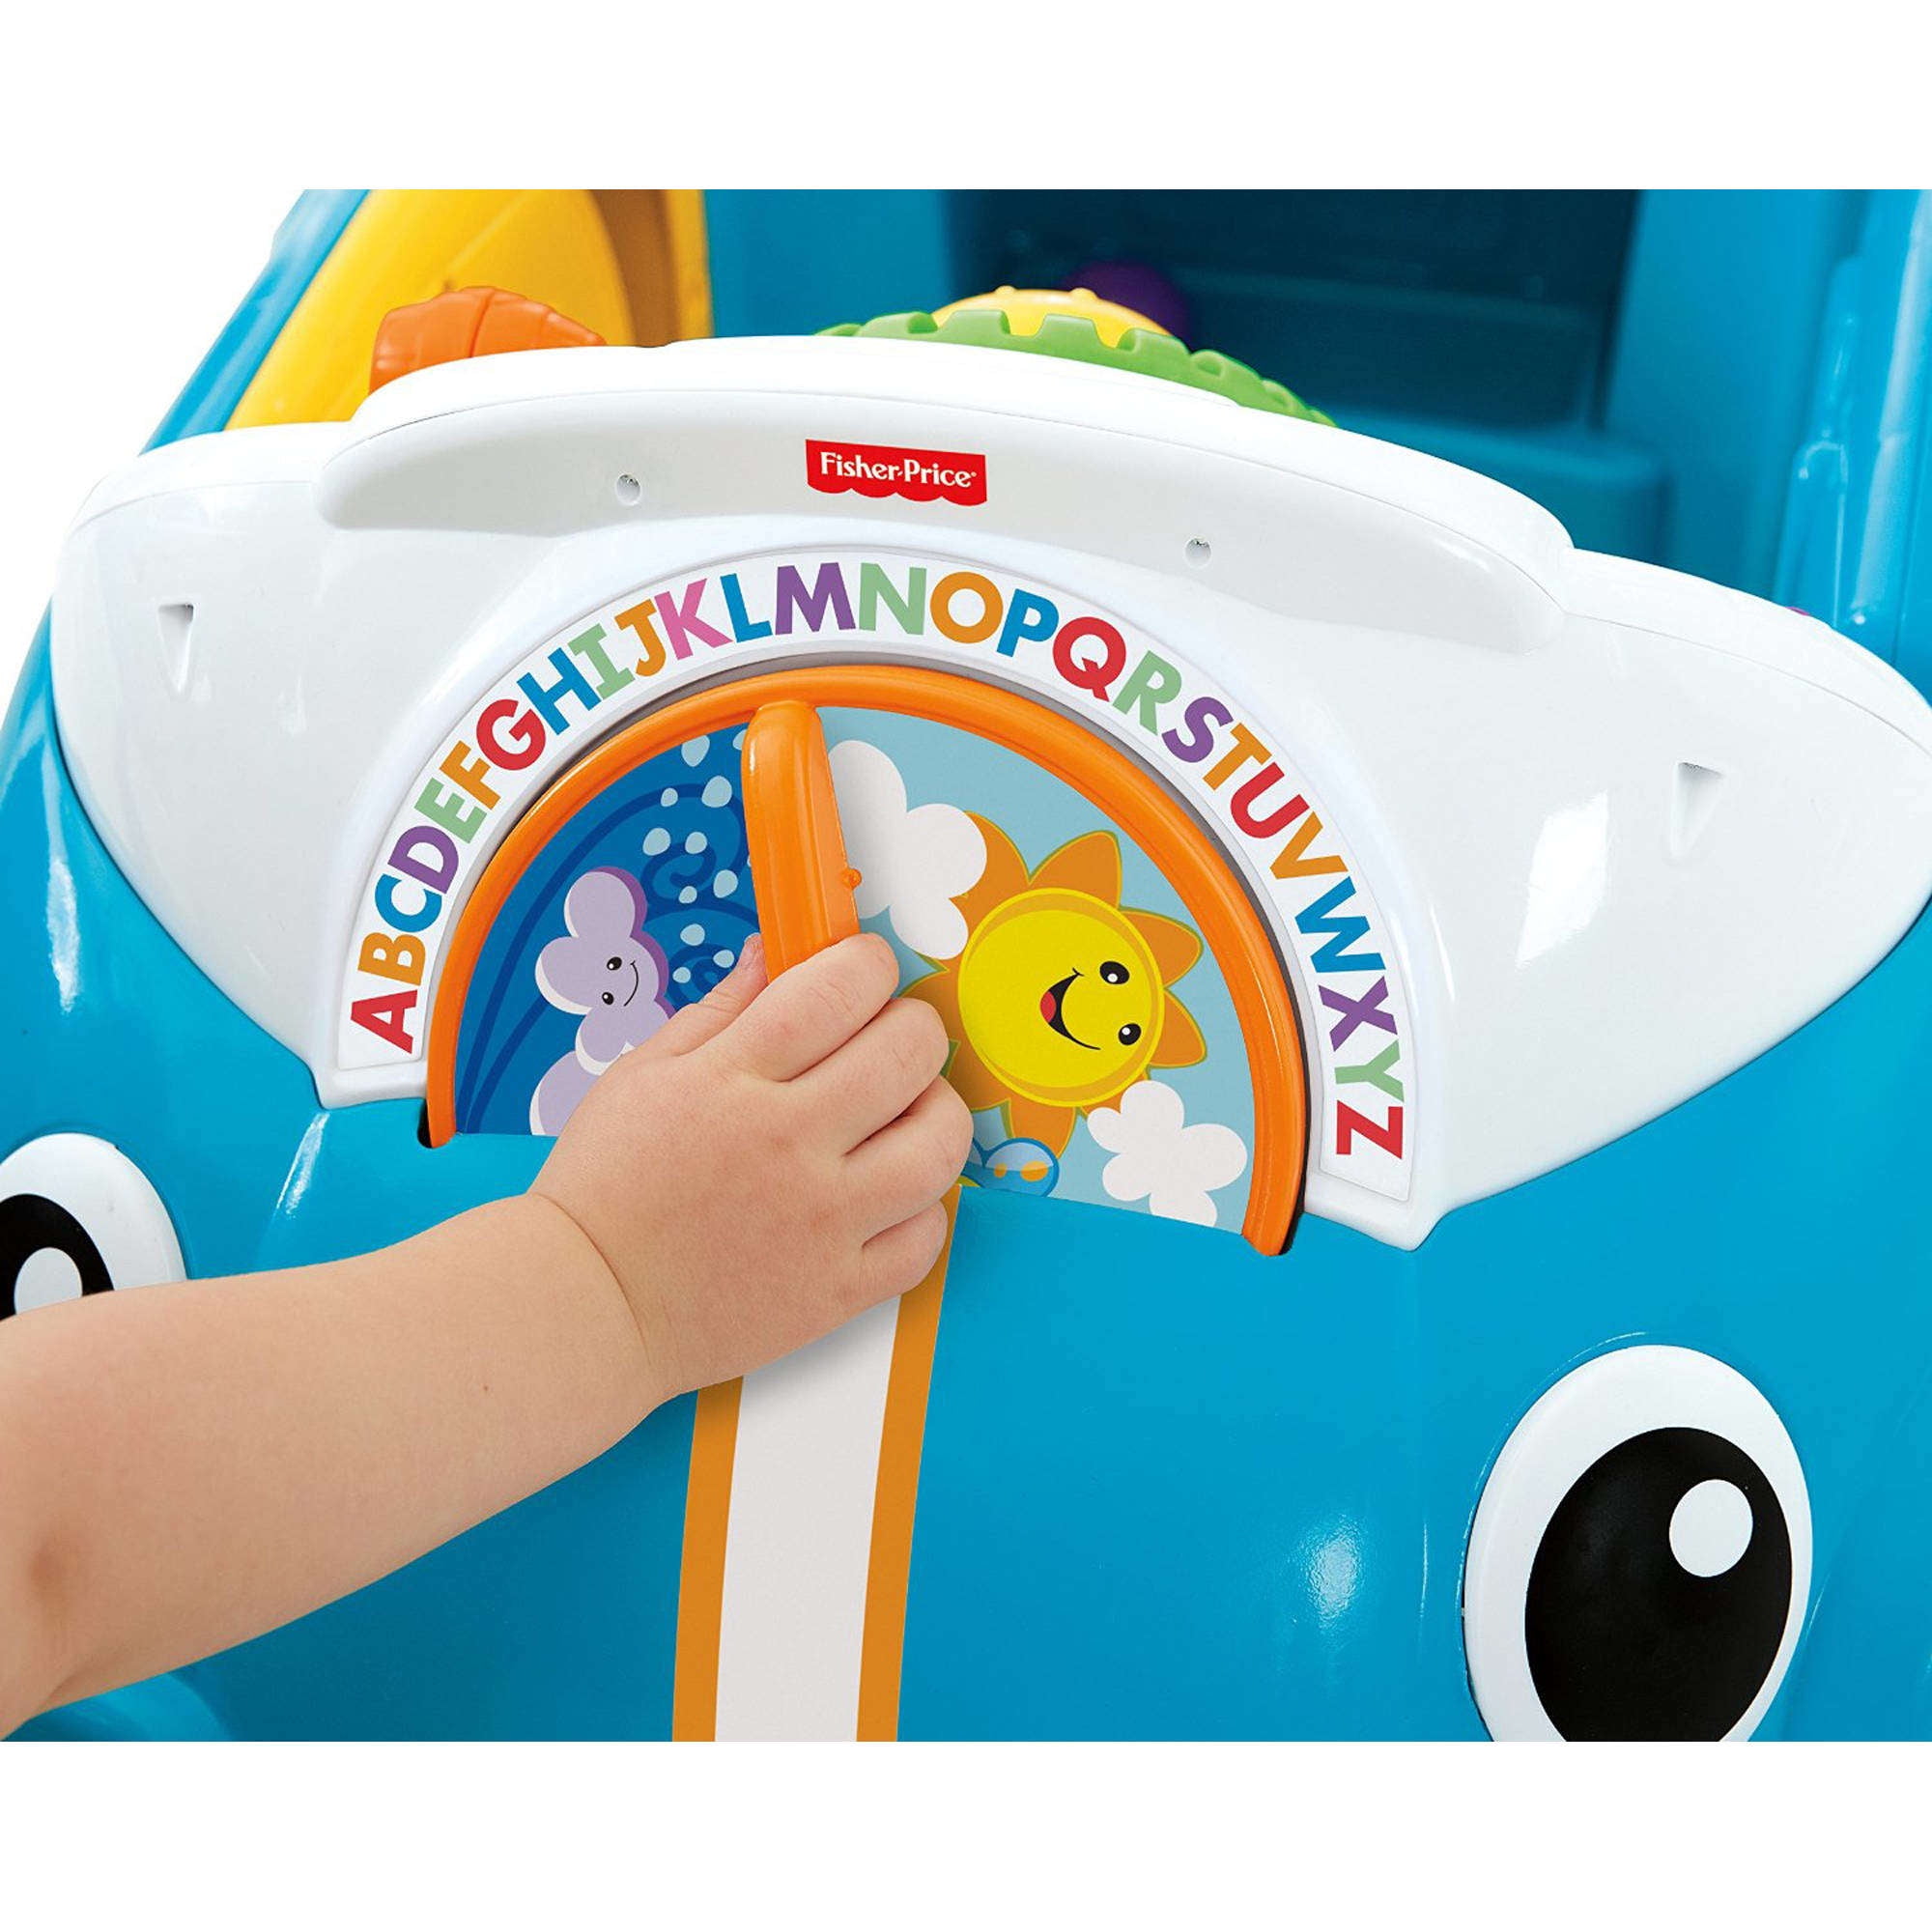 EDUCATIONAL TOYS 2 Year Old Toddlers Age 1 3 Learning 6 ...